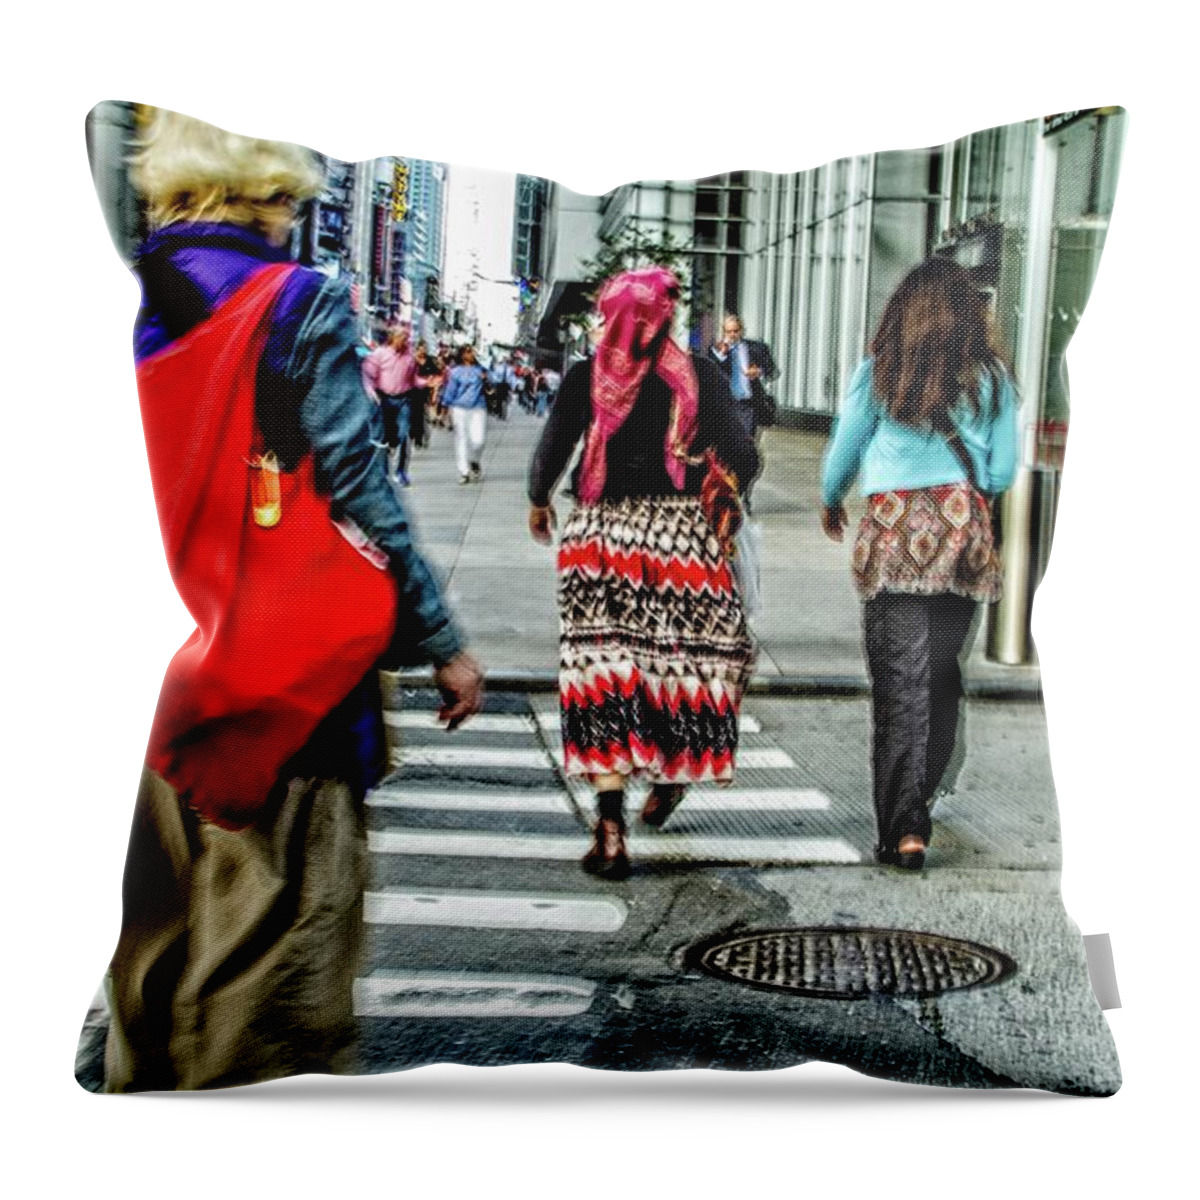 Crossing Throw Pillow featuring the photograph Crossing by Karol Livote